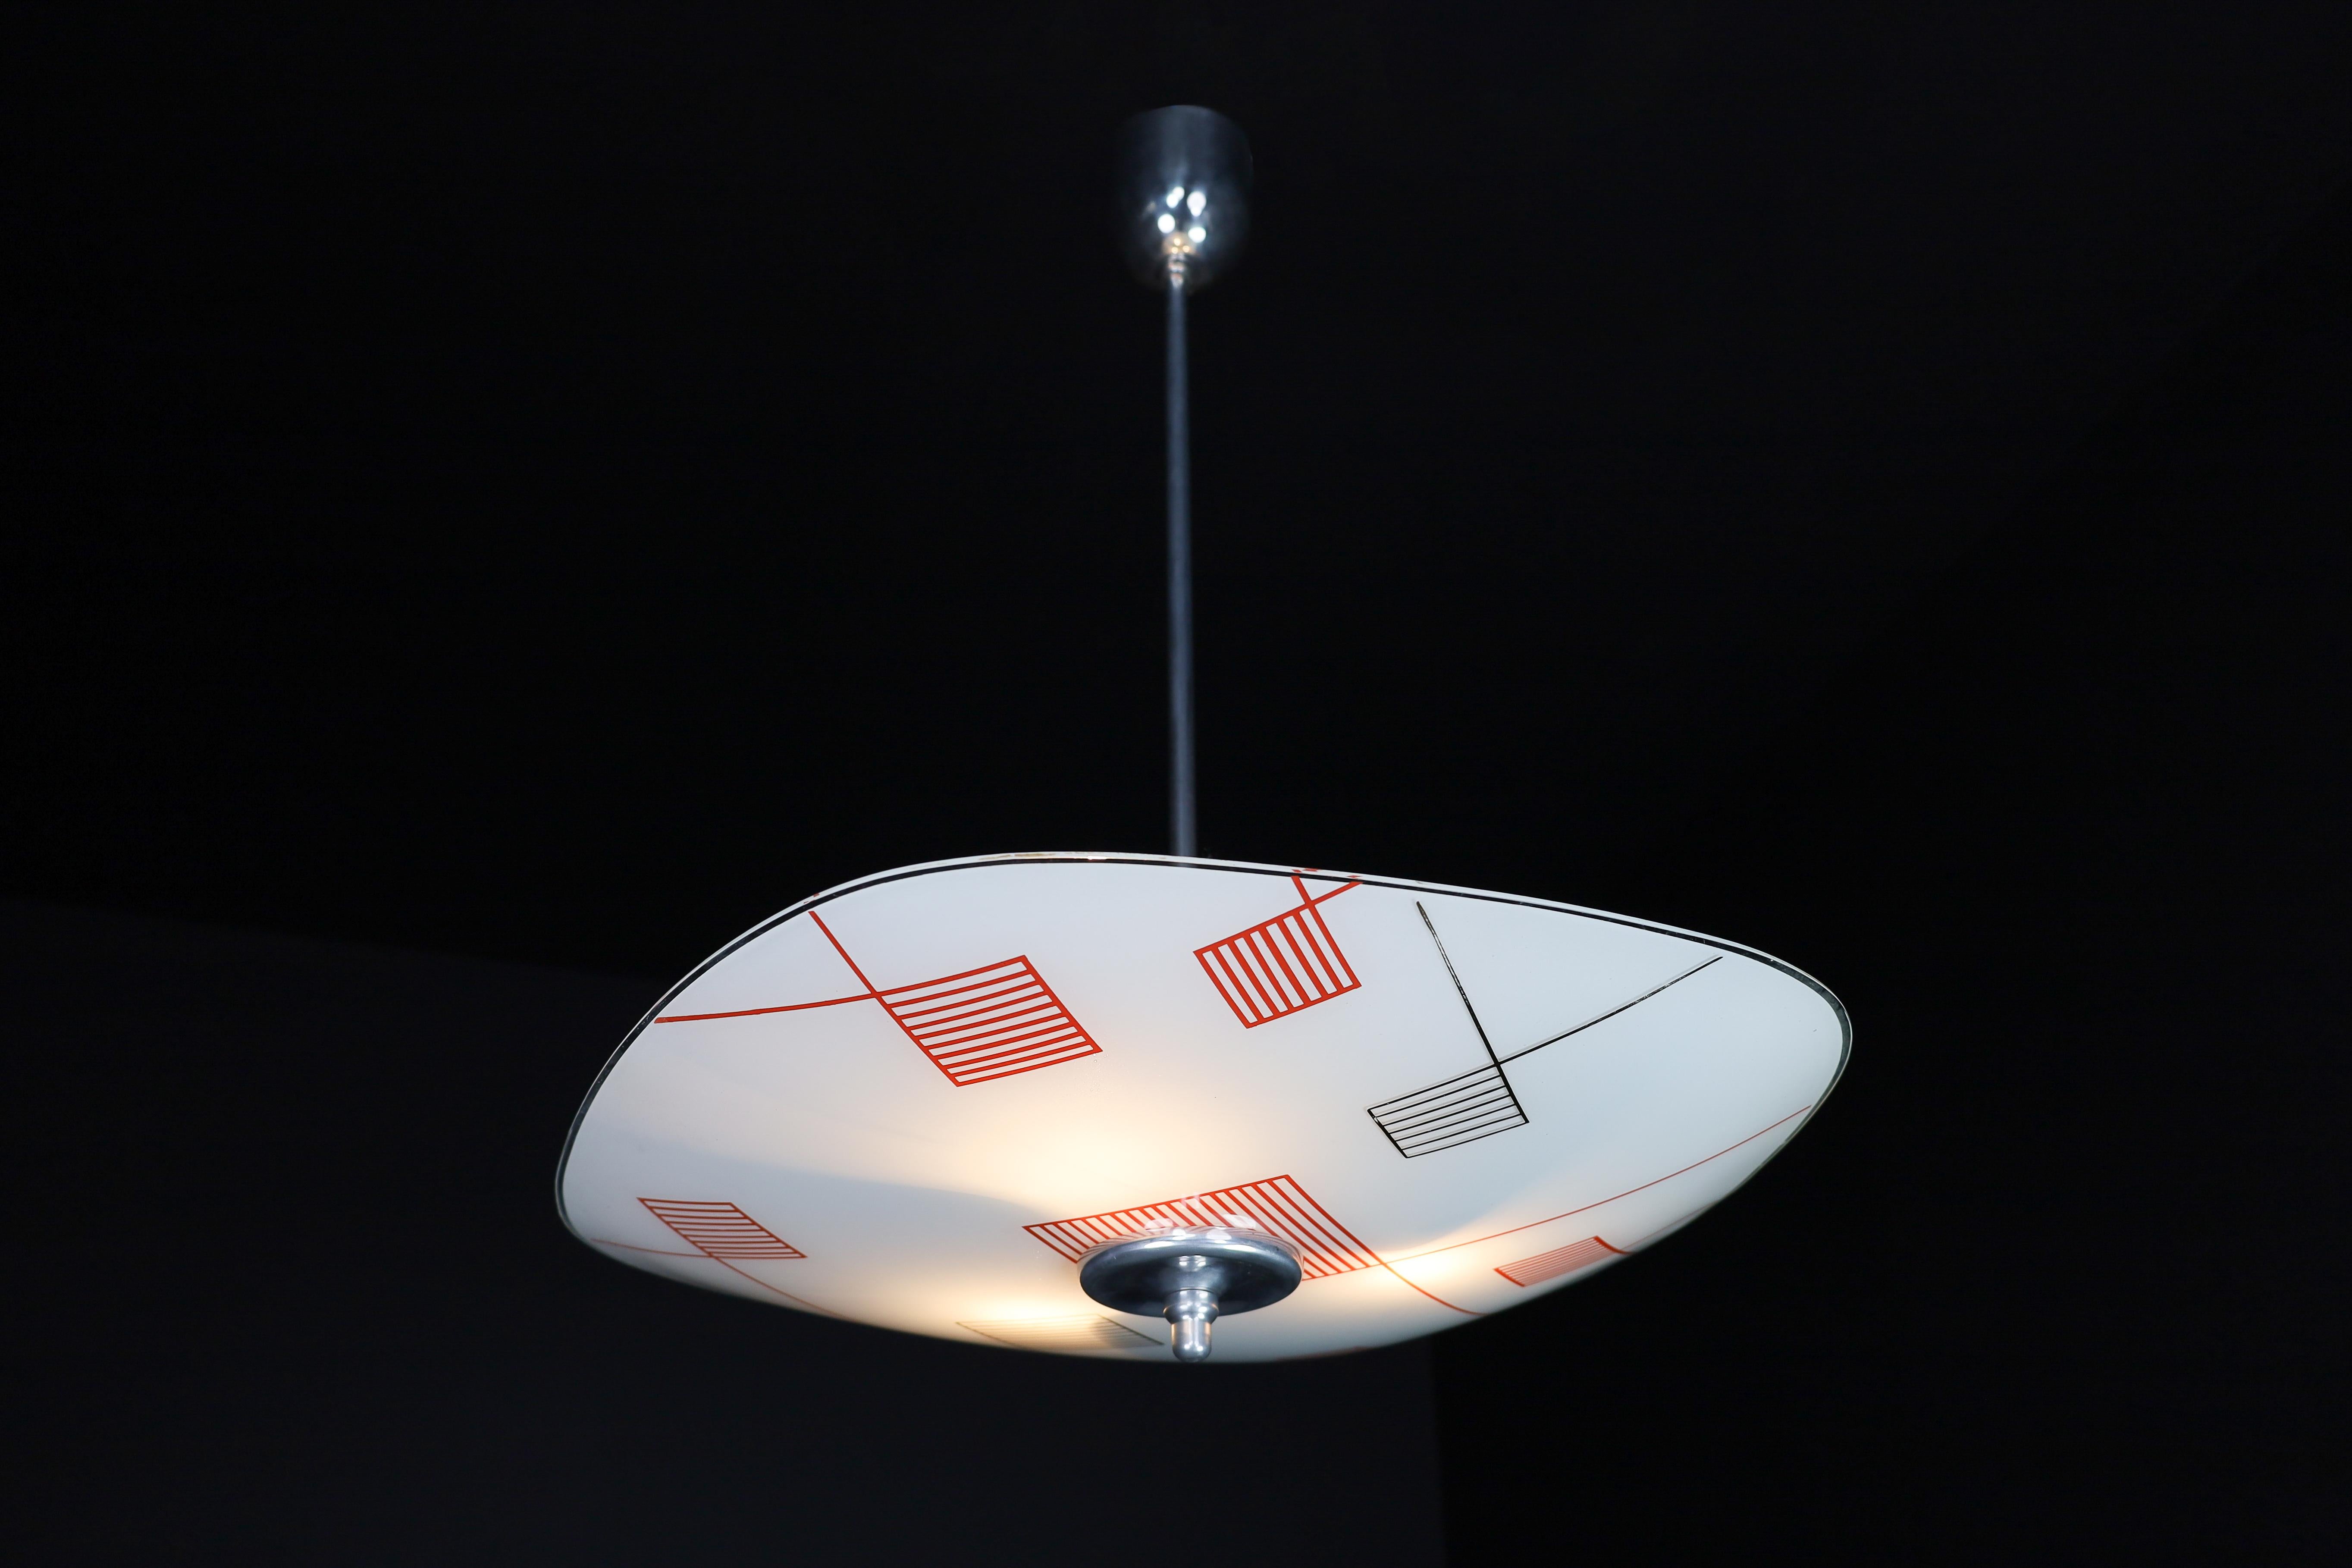 Mid-Century Modern Mid-Century Glass Hanging Pendant Lamp Brussels World Expo 1958 (5115) For Sale